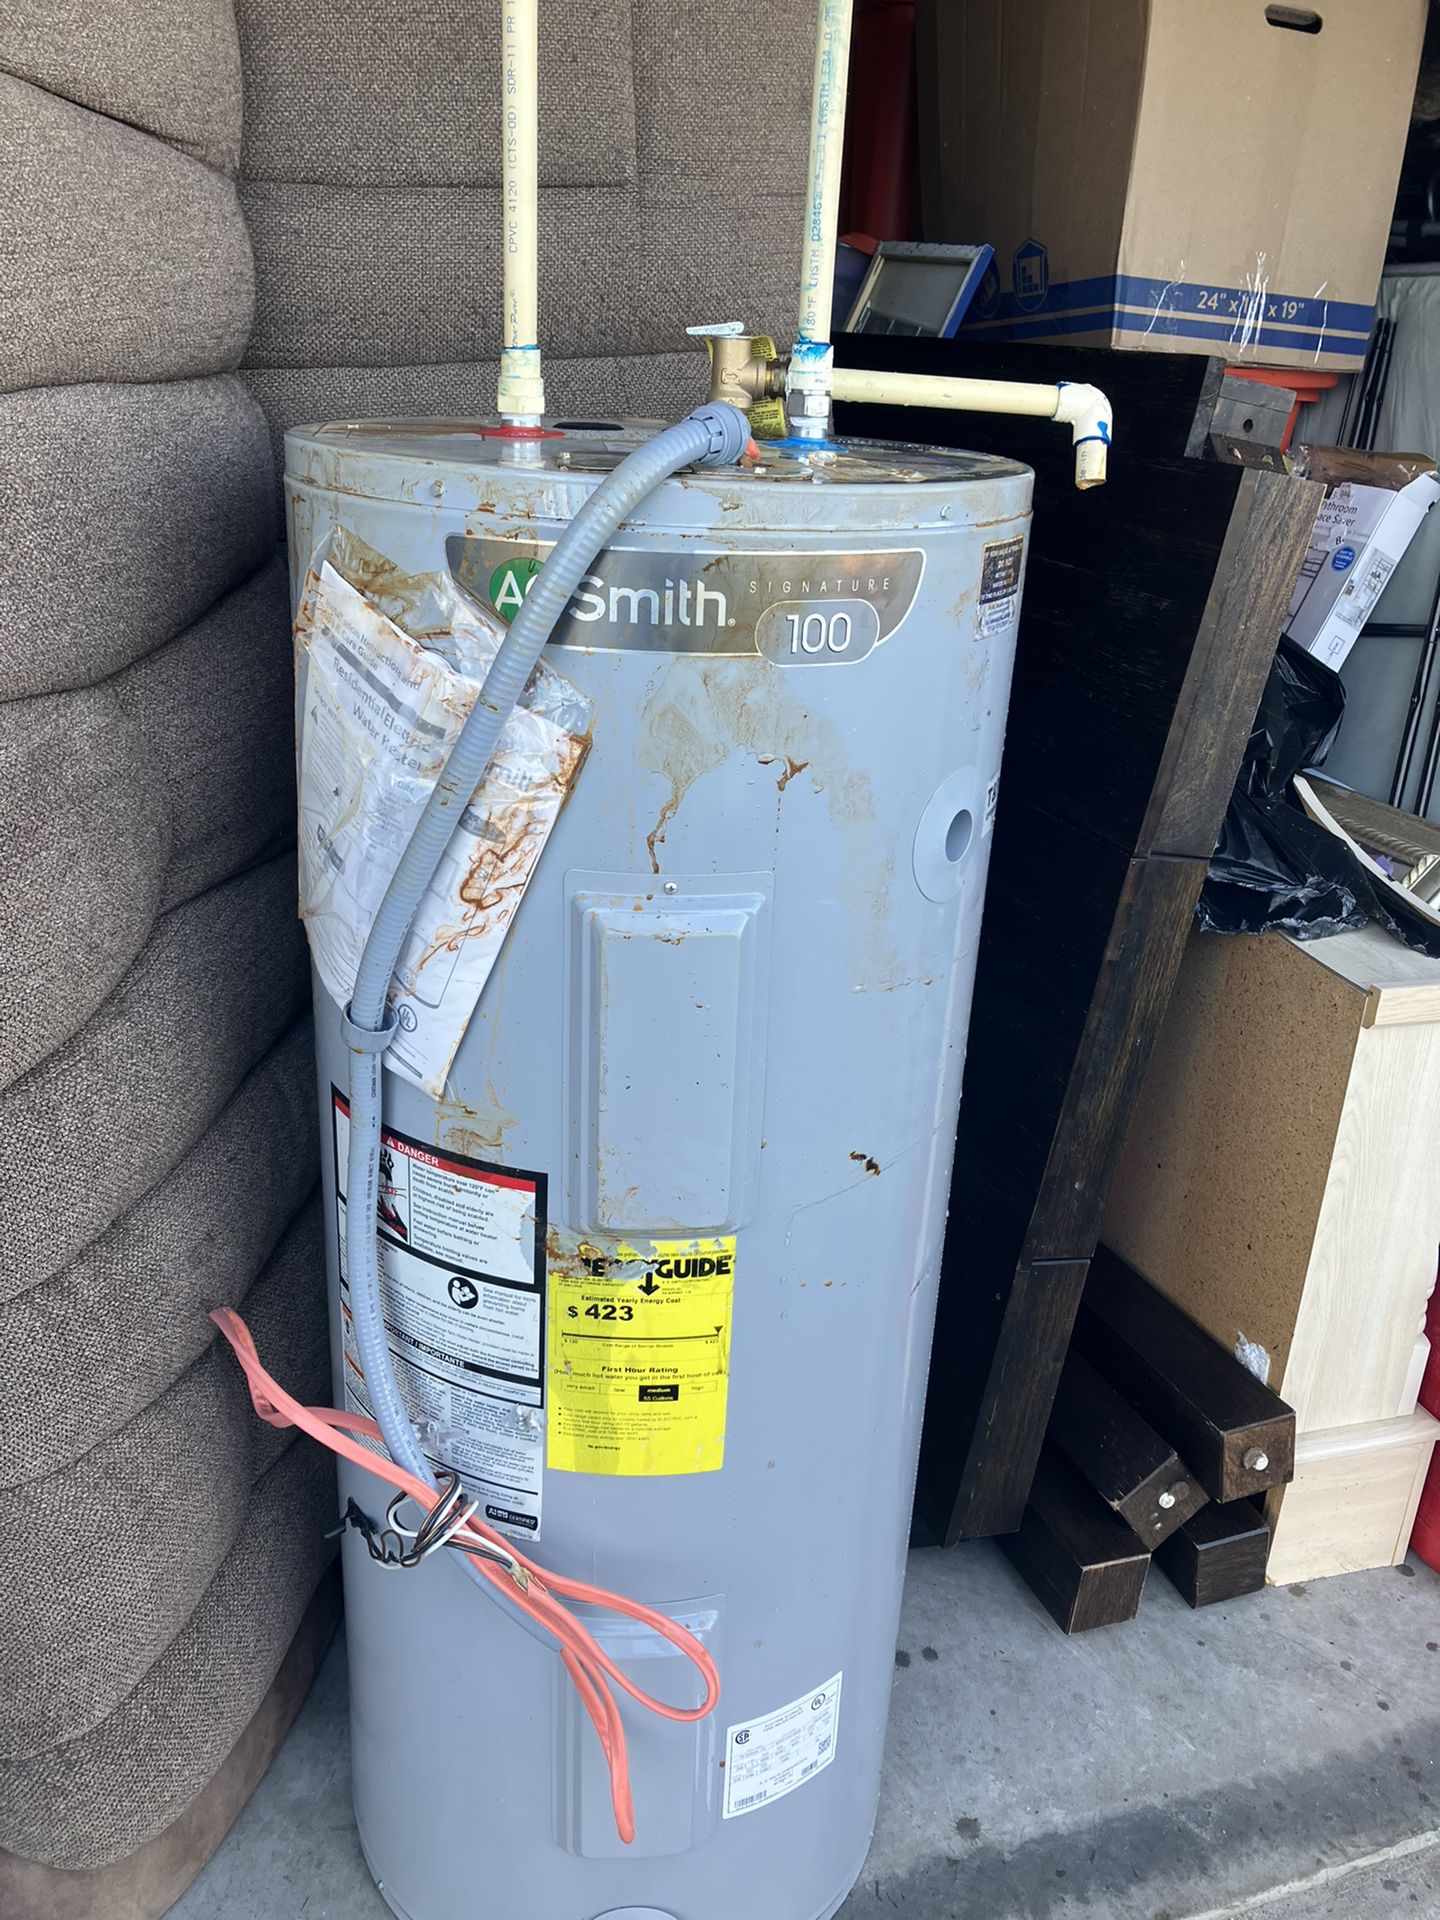 AO Smith Signature 100 Electric Water Heater